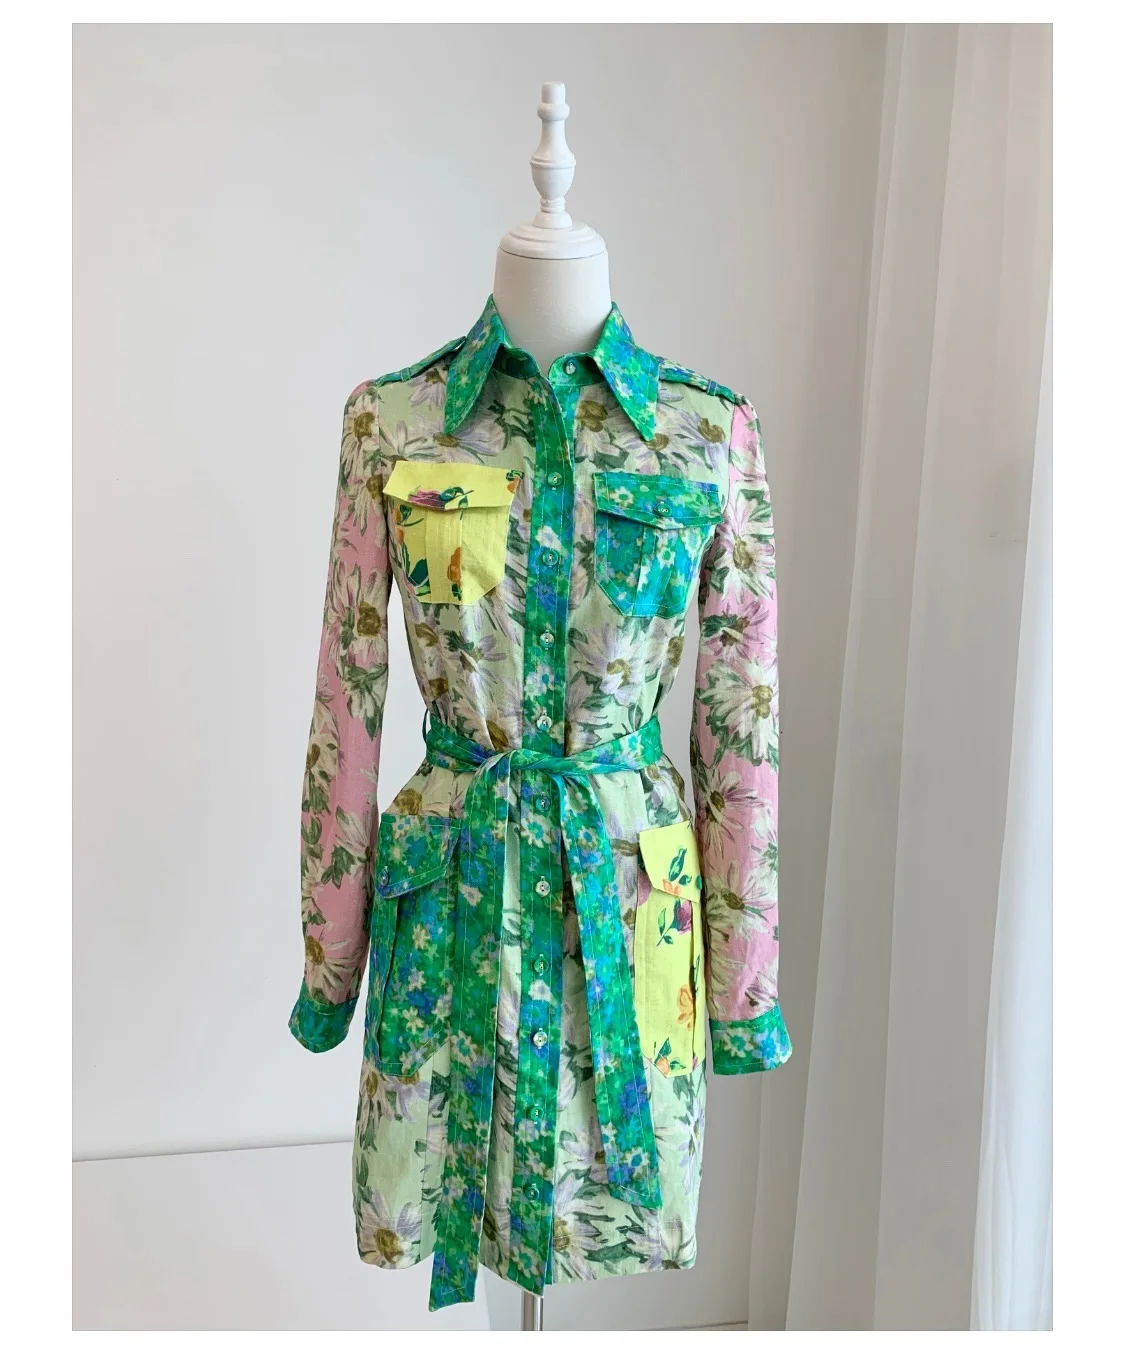 Women Colorful Flower Print Single Breasted Pockets Long Sleeve Shirt Style Mini Dress with Sashes